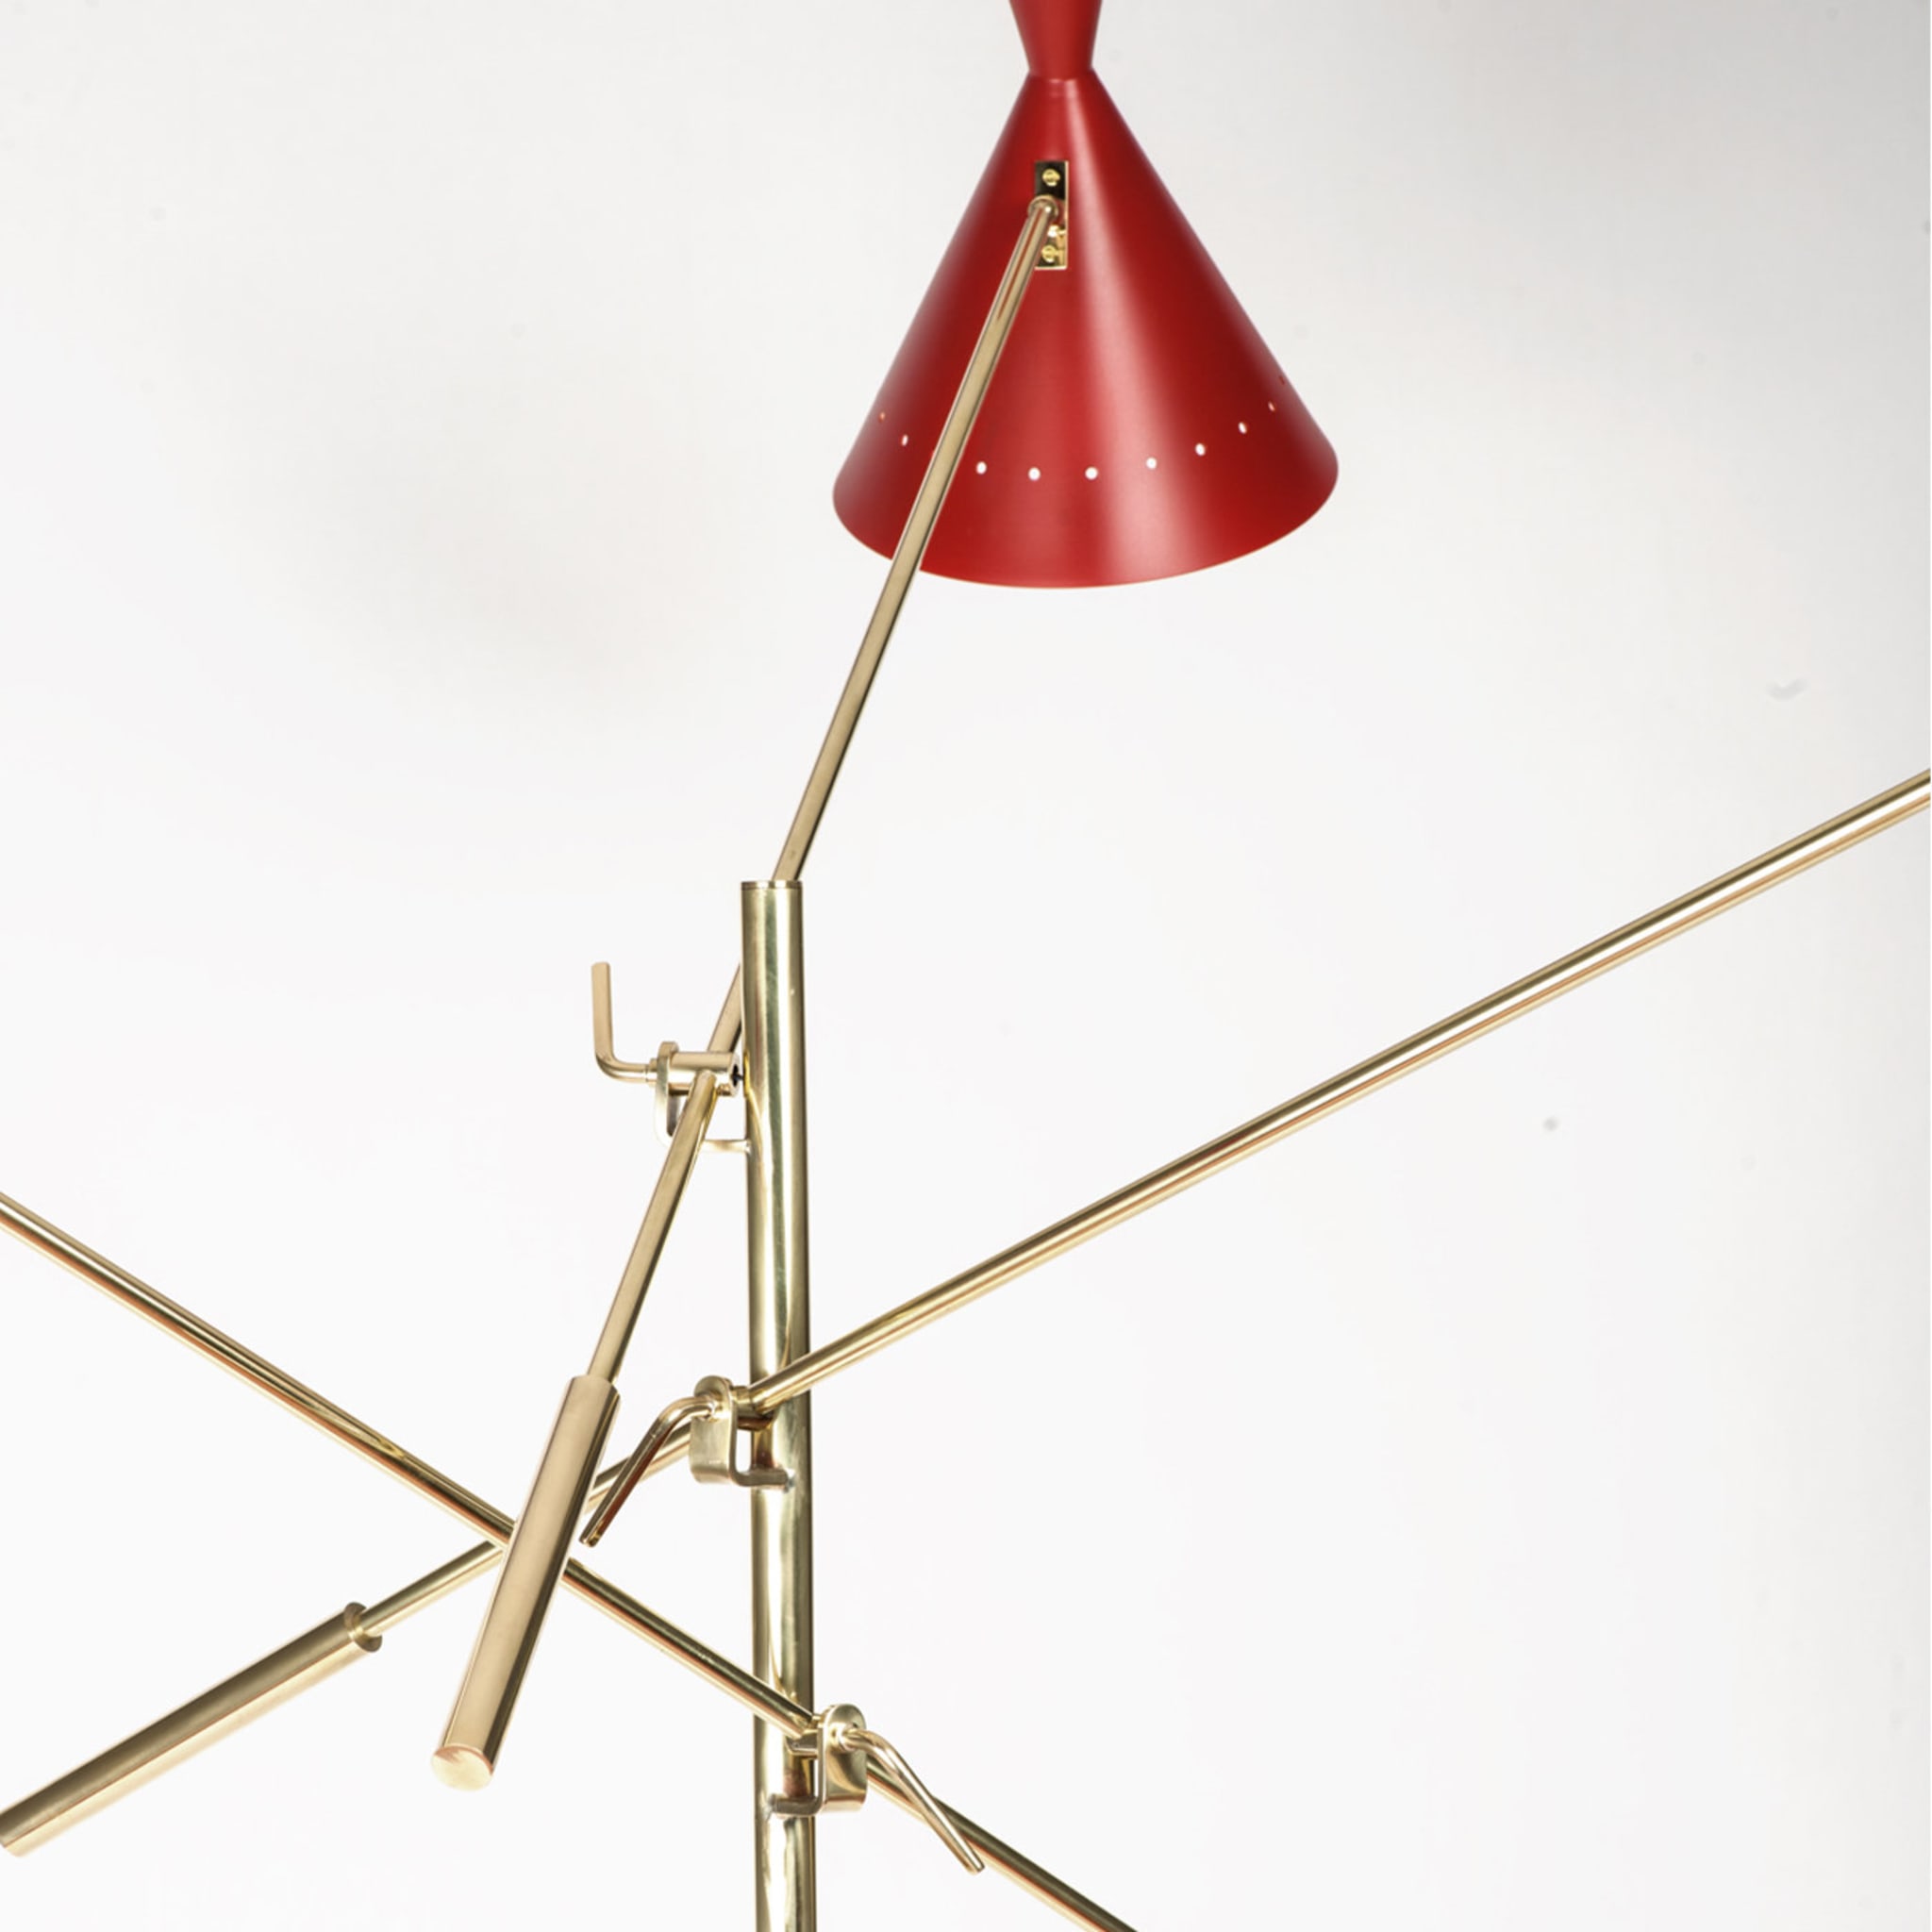 Three Cones Red and Pink Floor Lamp - Alternative view 1